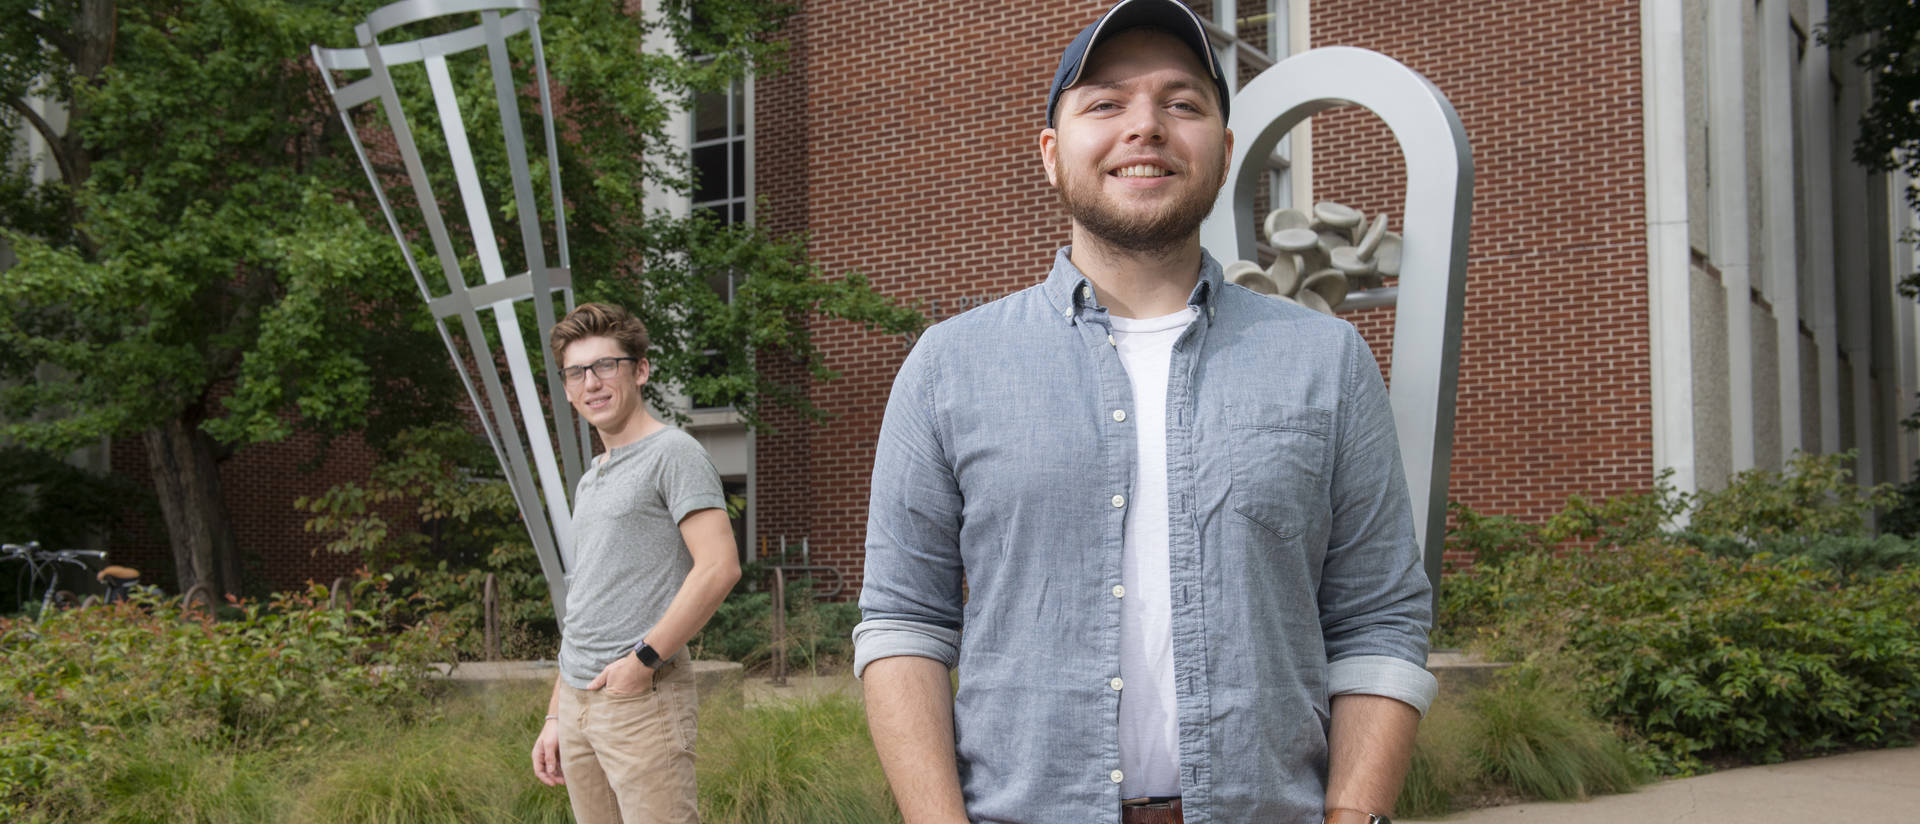 UW-Eau Claire student researchers Aaron Ellefson, right, and Cuyler Monahan participated in student-faculty research to develop a clinical foam to protect cancer patients during treatment.